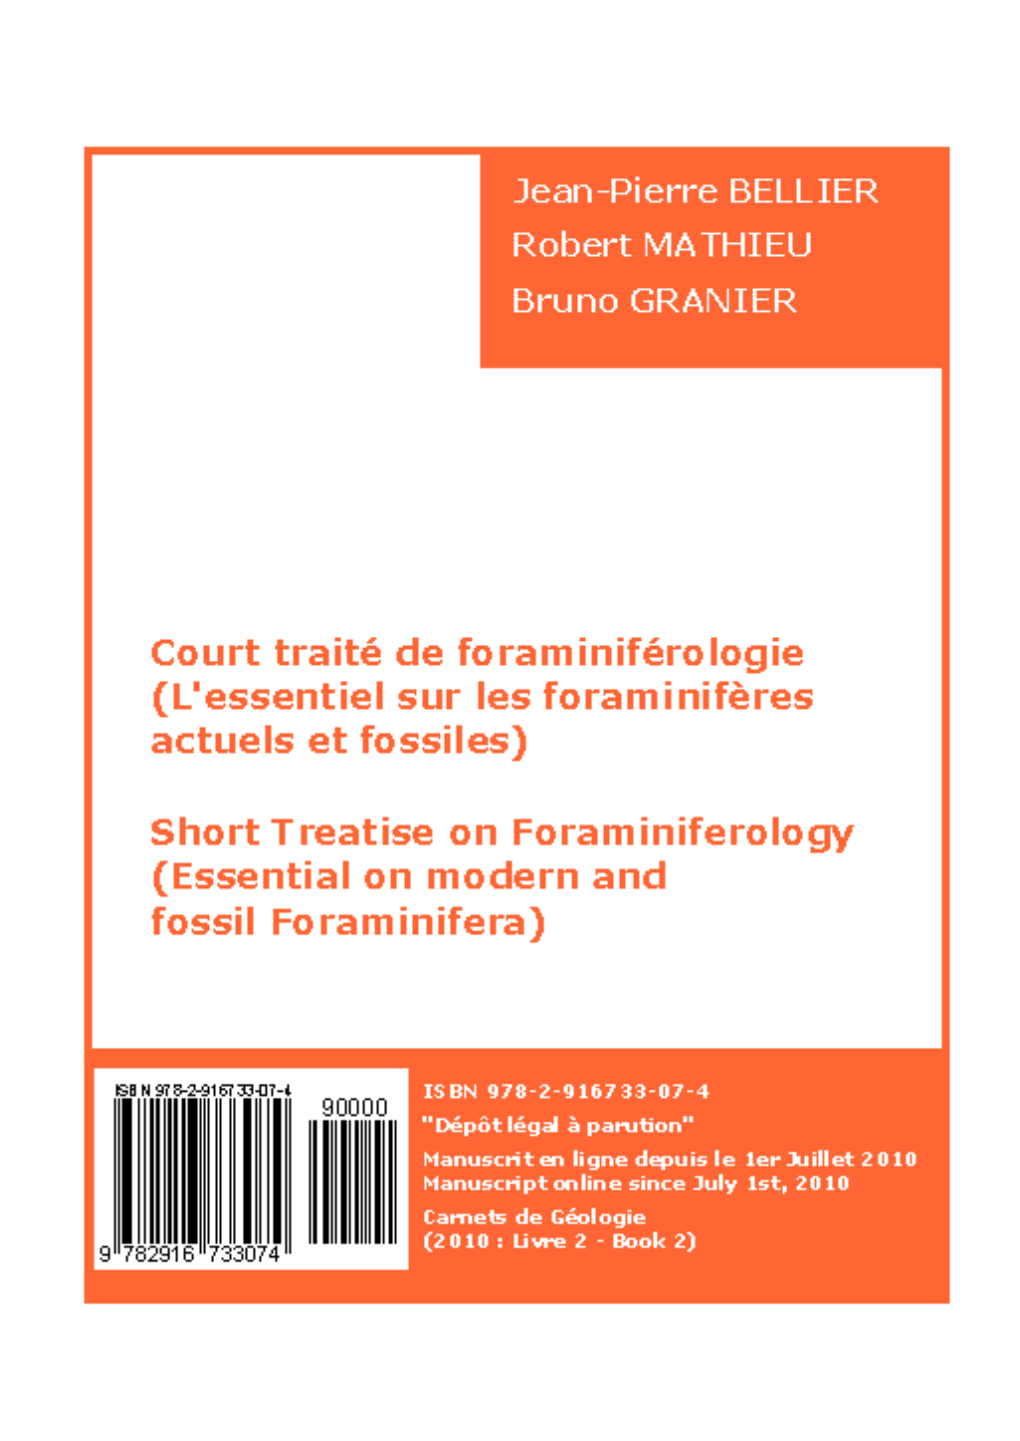 Short Treatise on Foraminiferology (Essential on Modern and Fossil Foraminifera)